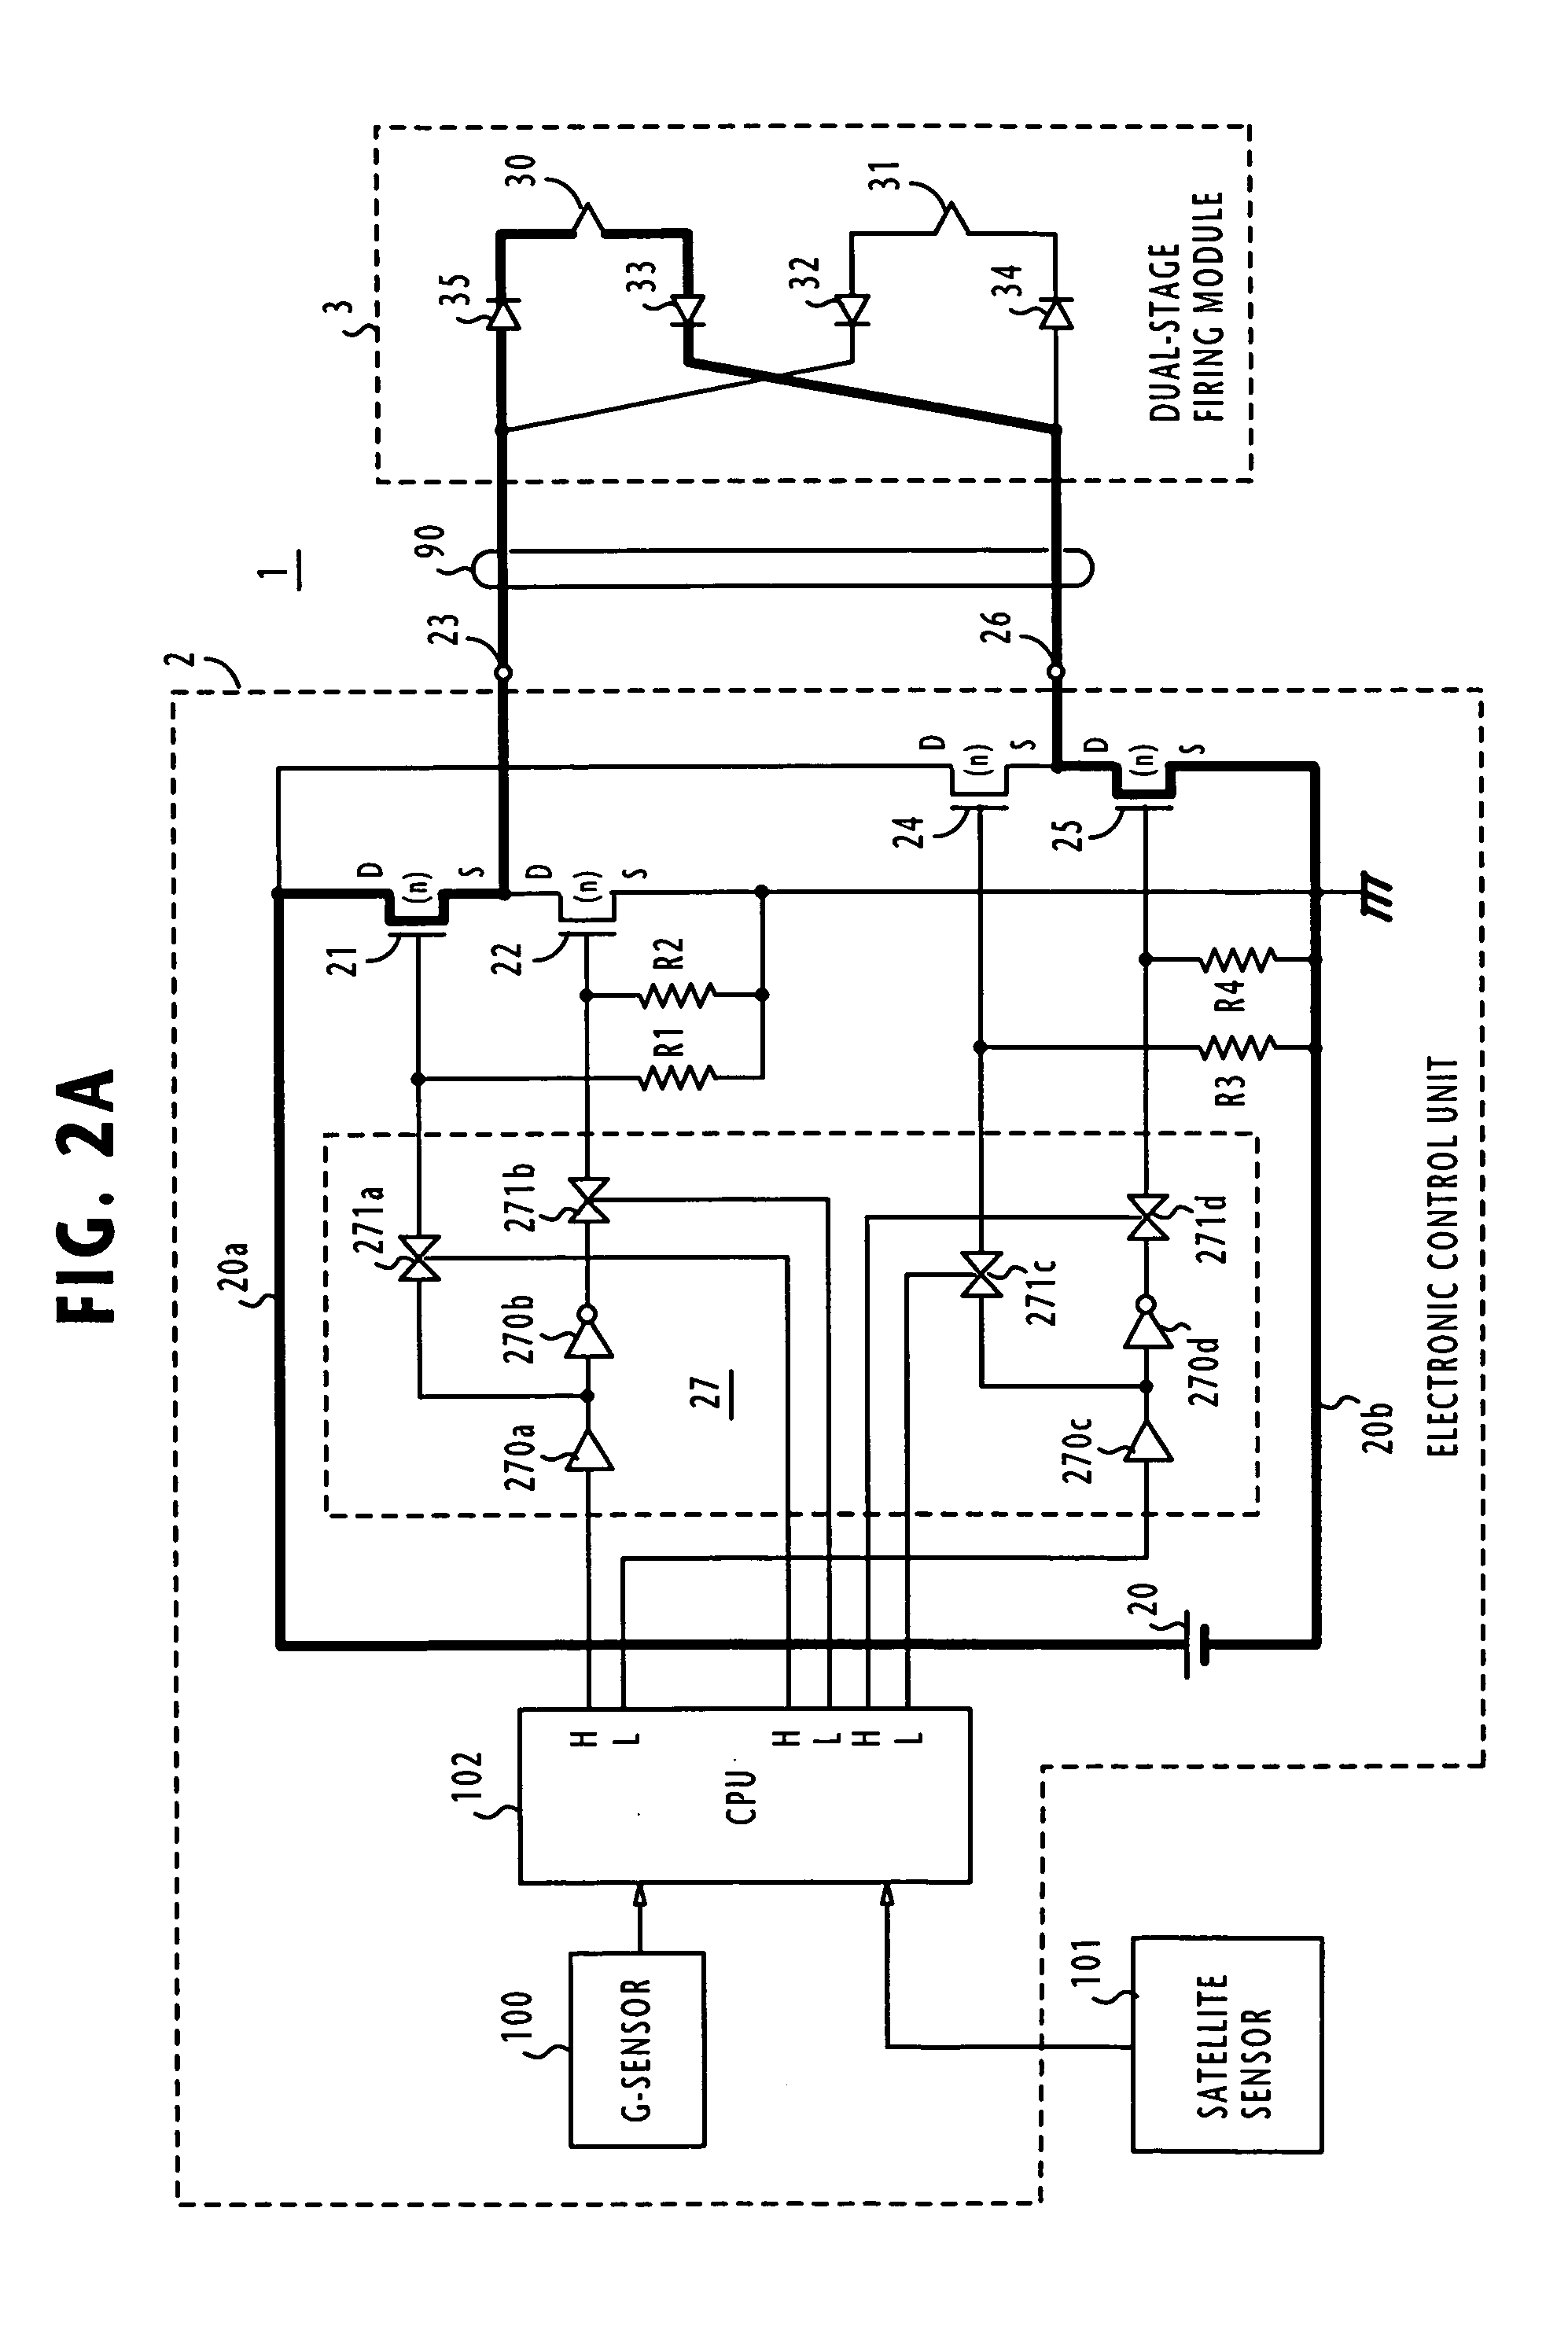 Electronic control unit and system for controlling dual-stage occupant restraint system